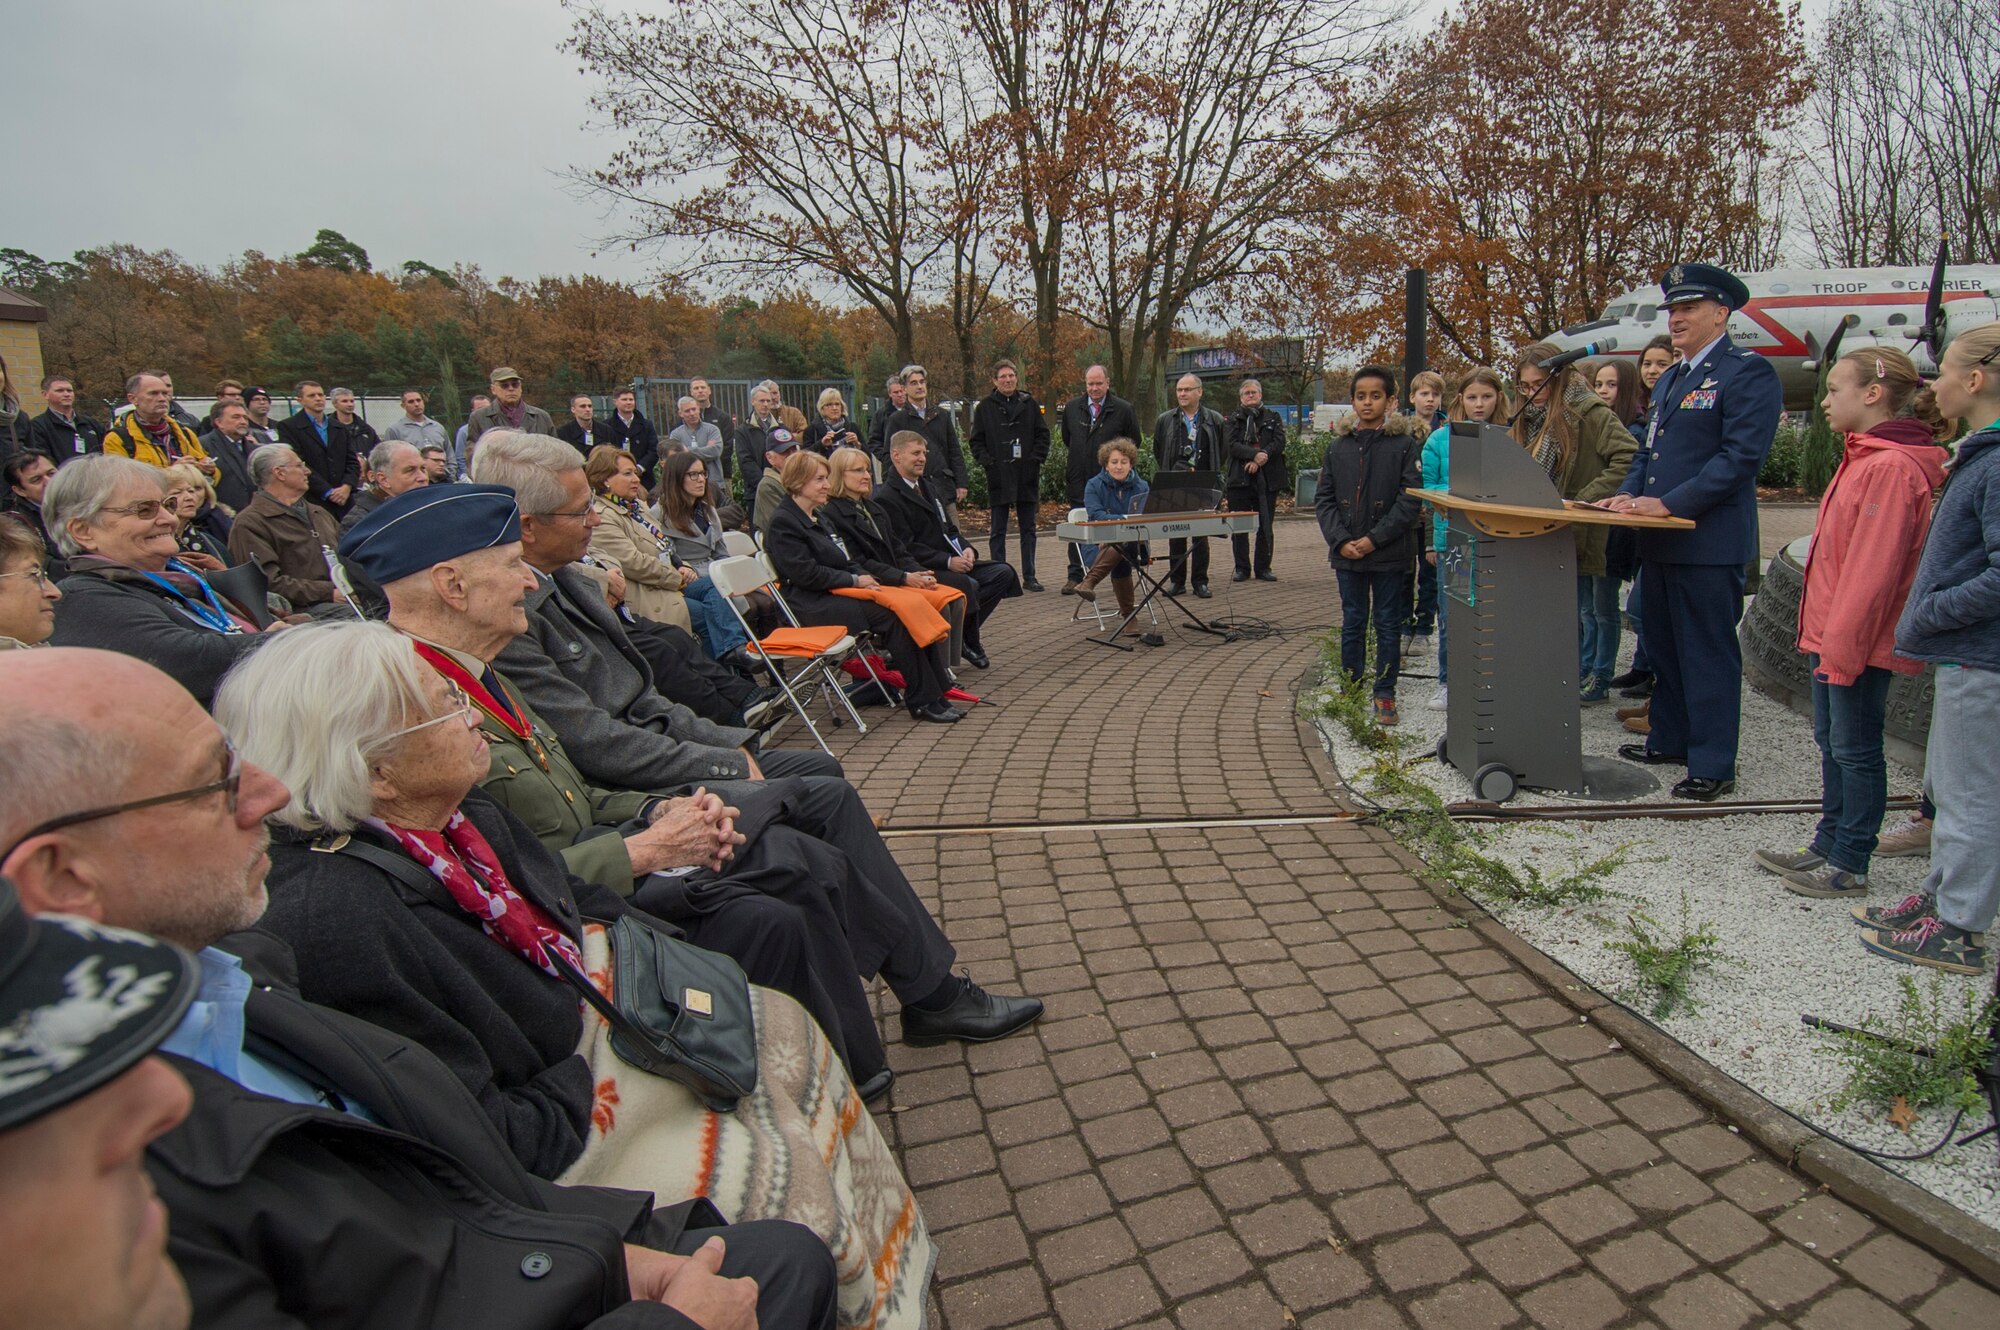 U.S. Air Force Col. Timothy Stretch, U.S. Air Forces Europe representative on behalf of the commander, speaking during the reopening ceremony of the Berlin Airlift Memorial outside Frankfurt International Airport, Germany, Nov. 22, 2016. The ceremony included retired U.S. Air Force Col. Gail Halvorsen, also known as the Candy Bomber, who dropped 23 tons of candy with makeshift parachutes from his C-54 Skymaster as part of the humanitarian supply mission. The Berlin Airlift, also known as Operation Vittles, delivered more than two million tons of food to the blockaded citizens of West Berlin between June 1948 and October 1949. (U.S. Air Force photo by Staff Sgt. Joe W. McFadden)